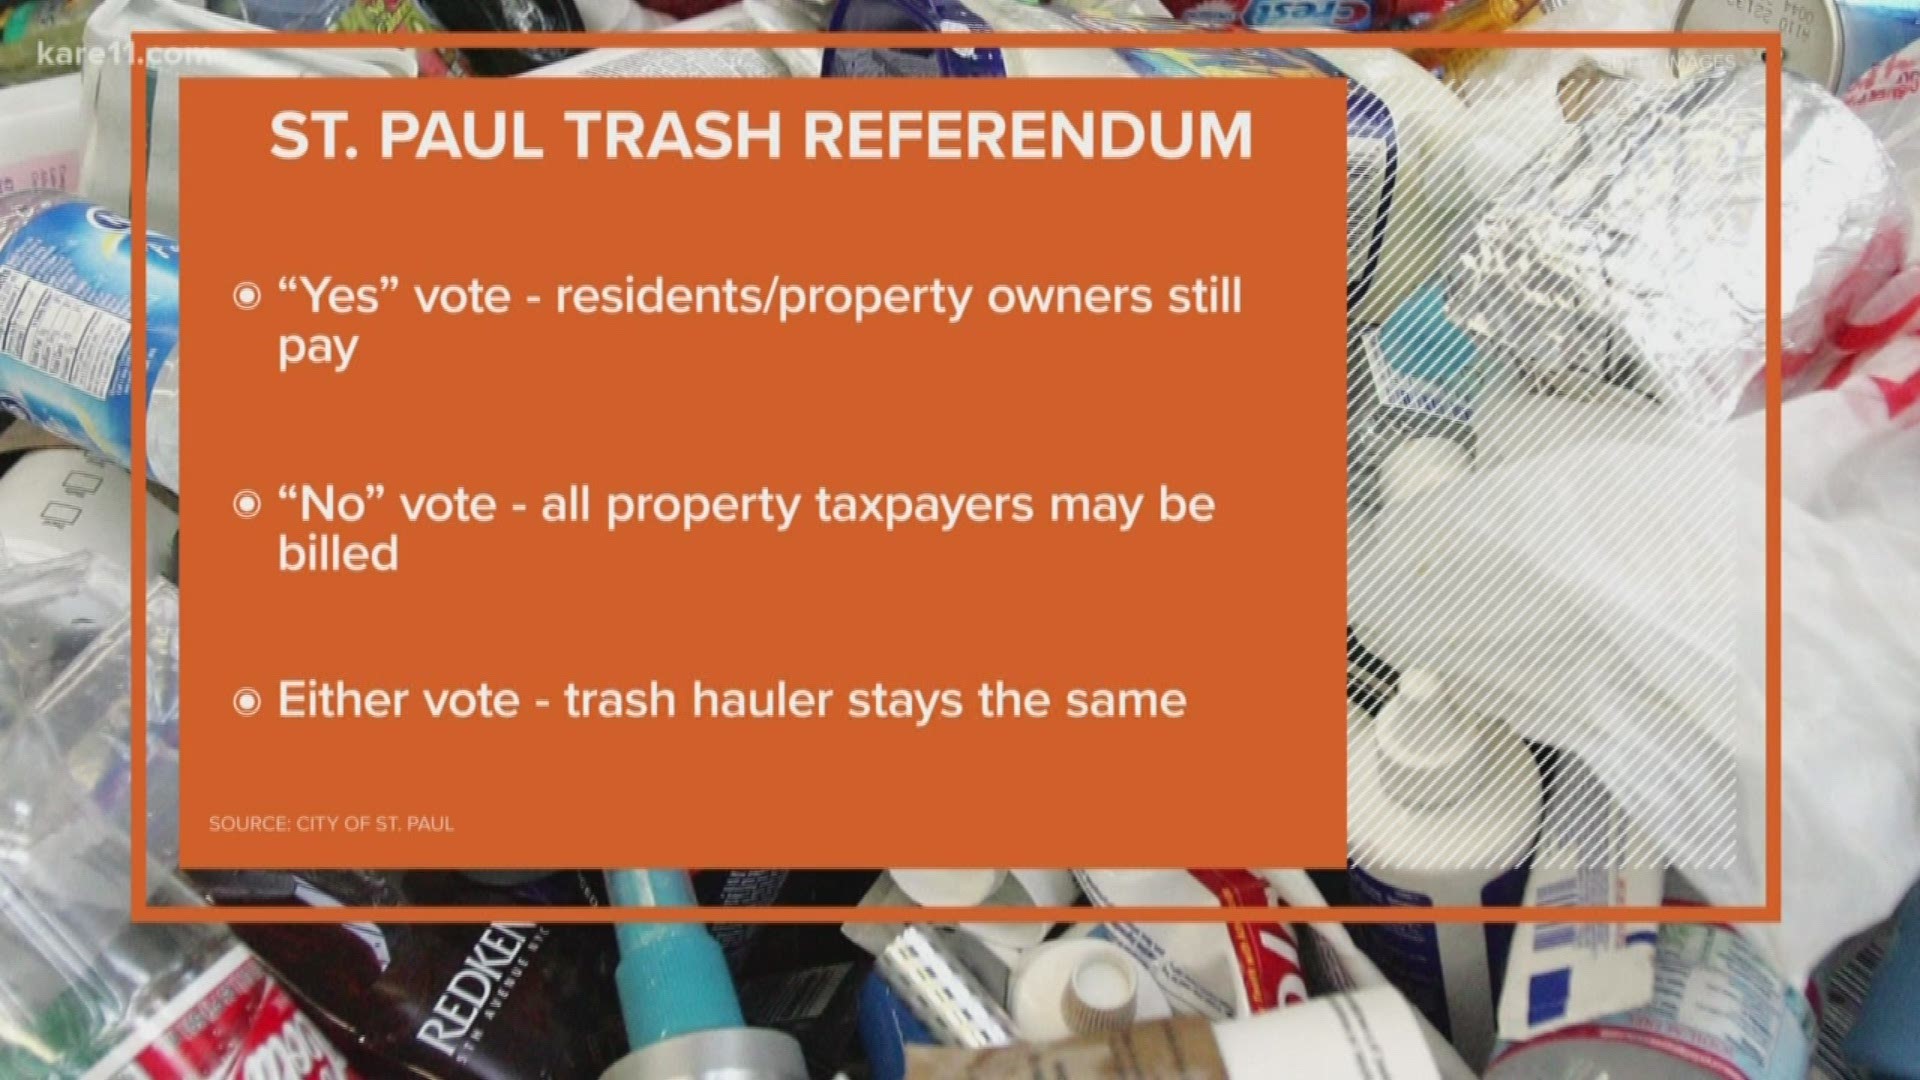 One of the big issues on the ballot is a vote on St. Paul's trash.